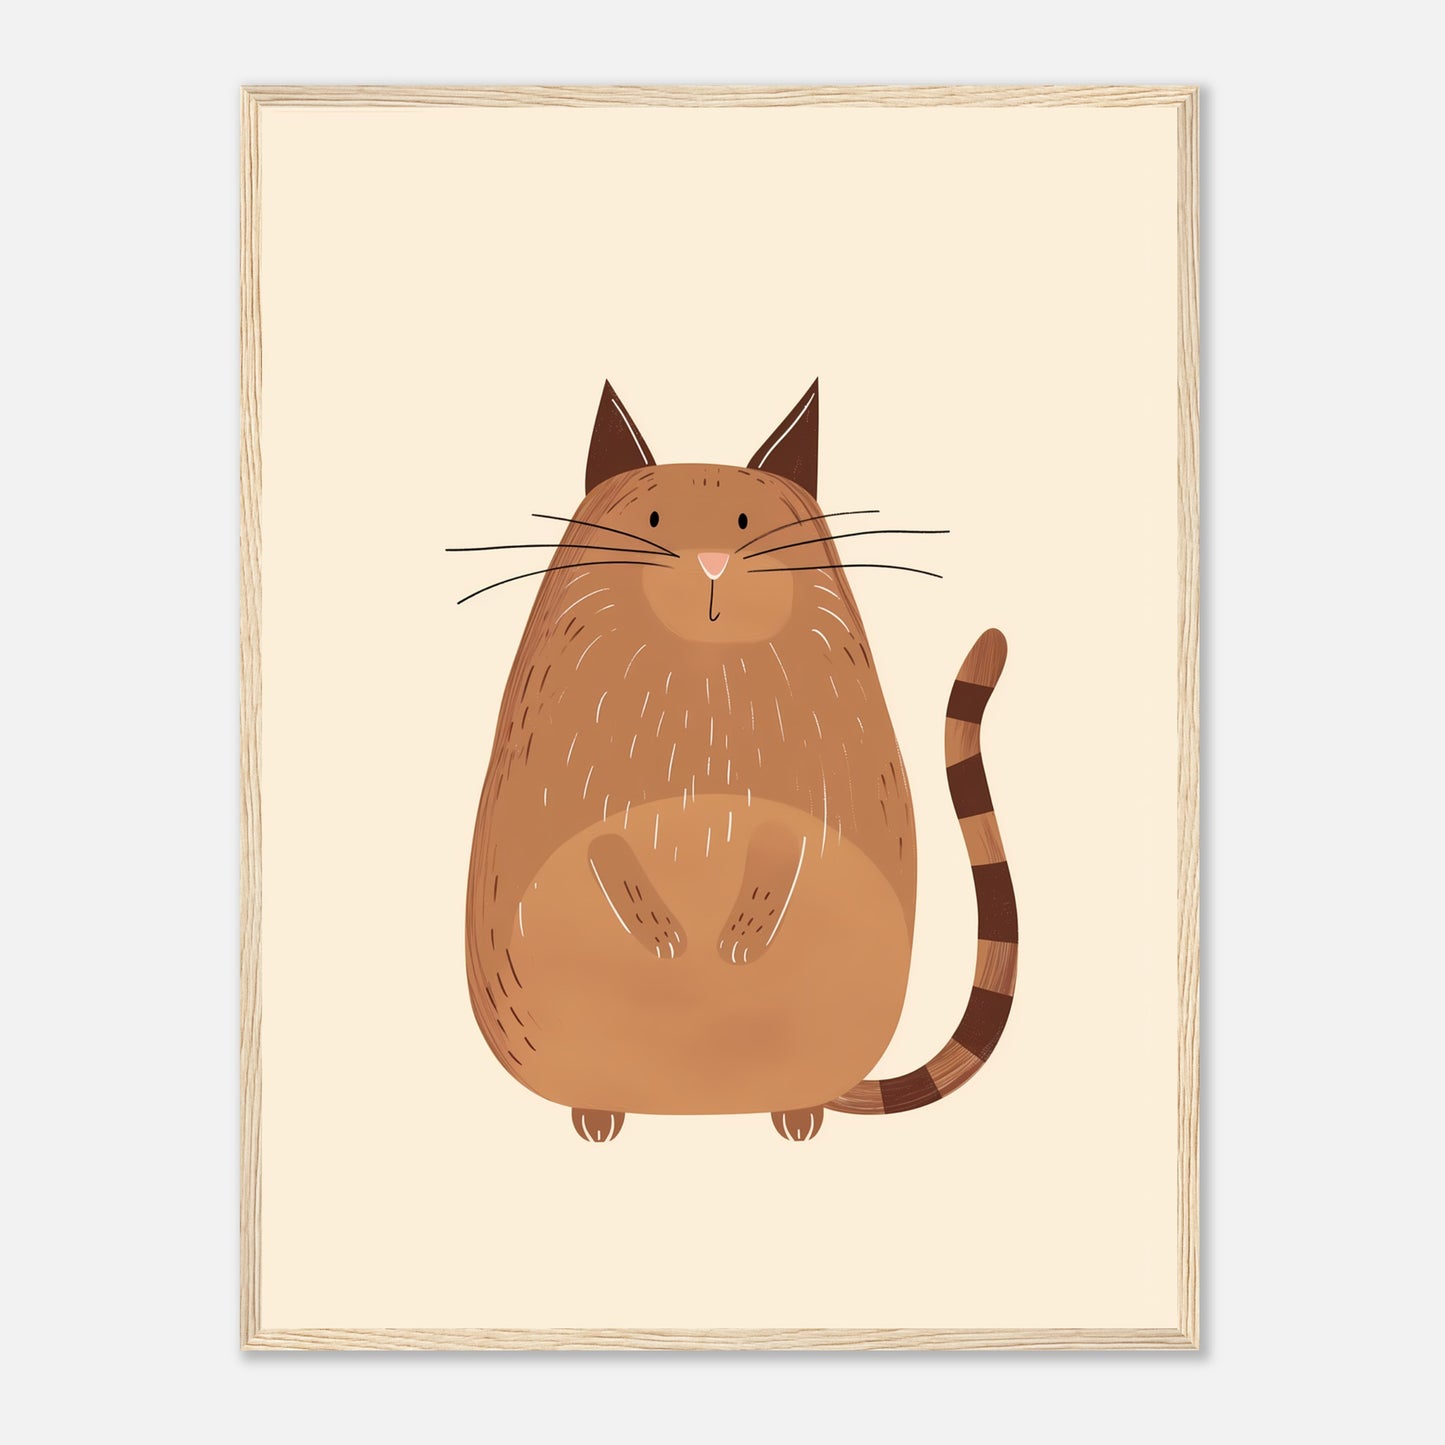 Illustration of a plump brown cat with stripes, hanging in a framed picture.